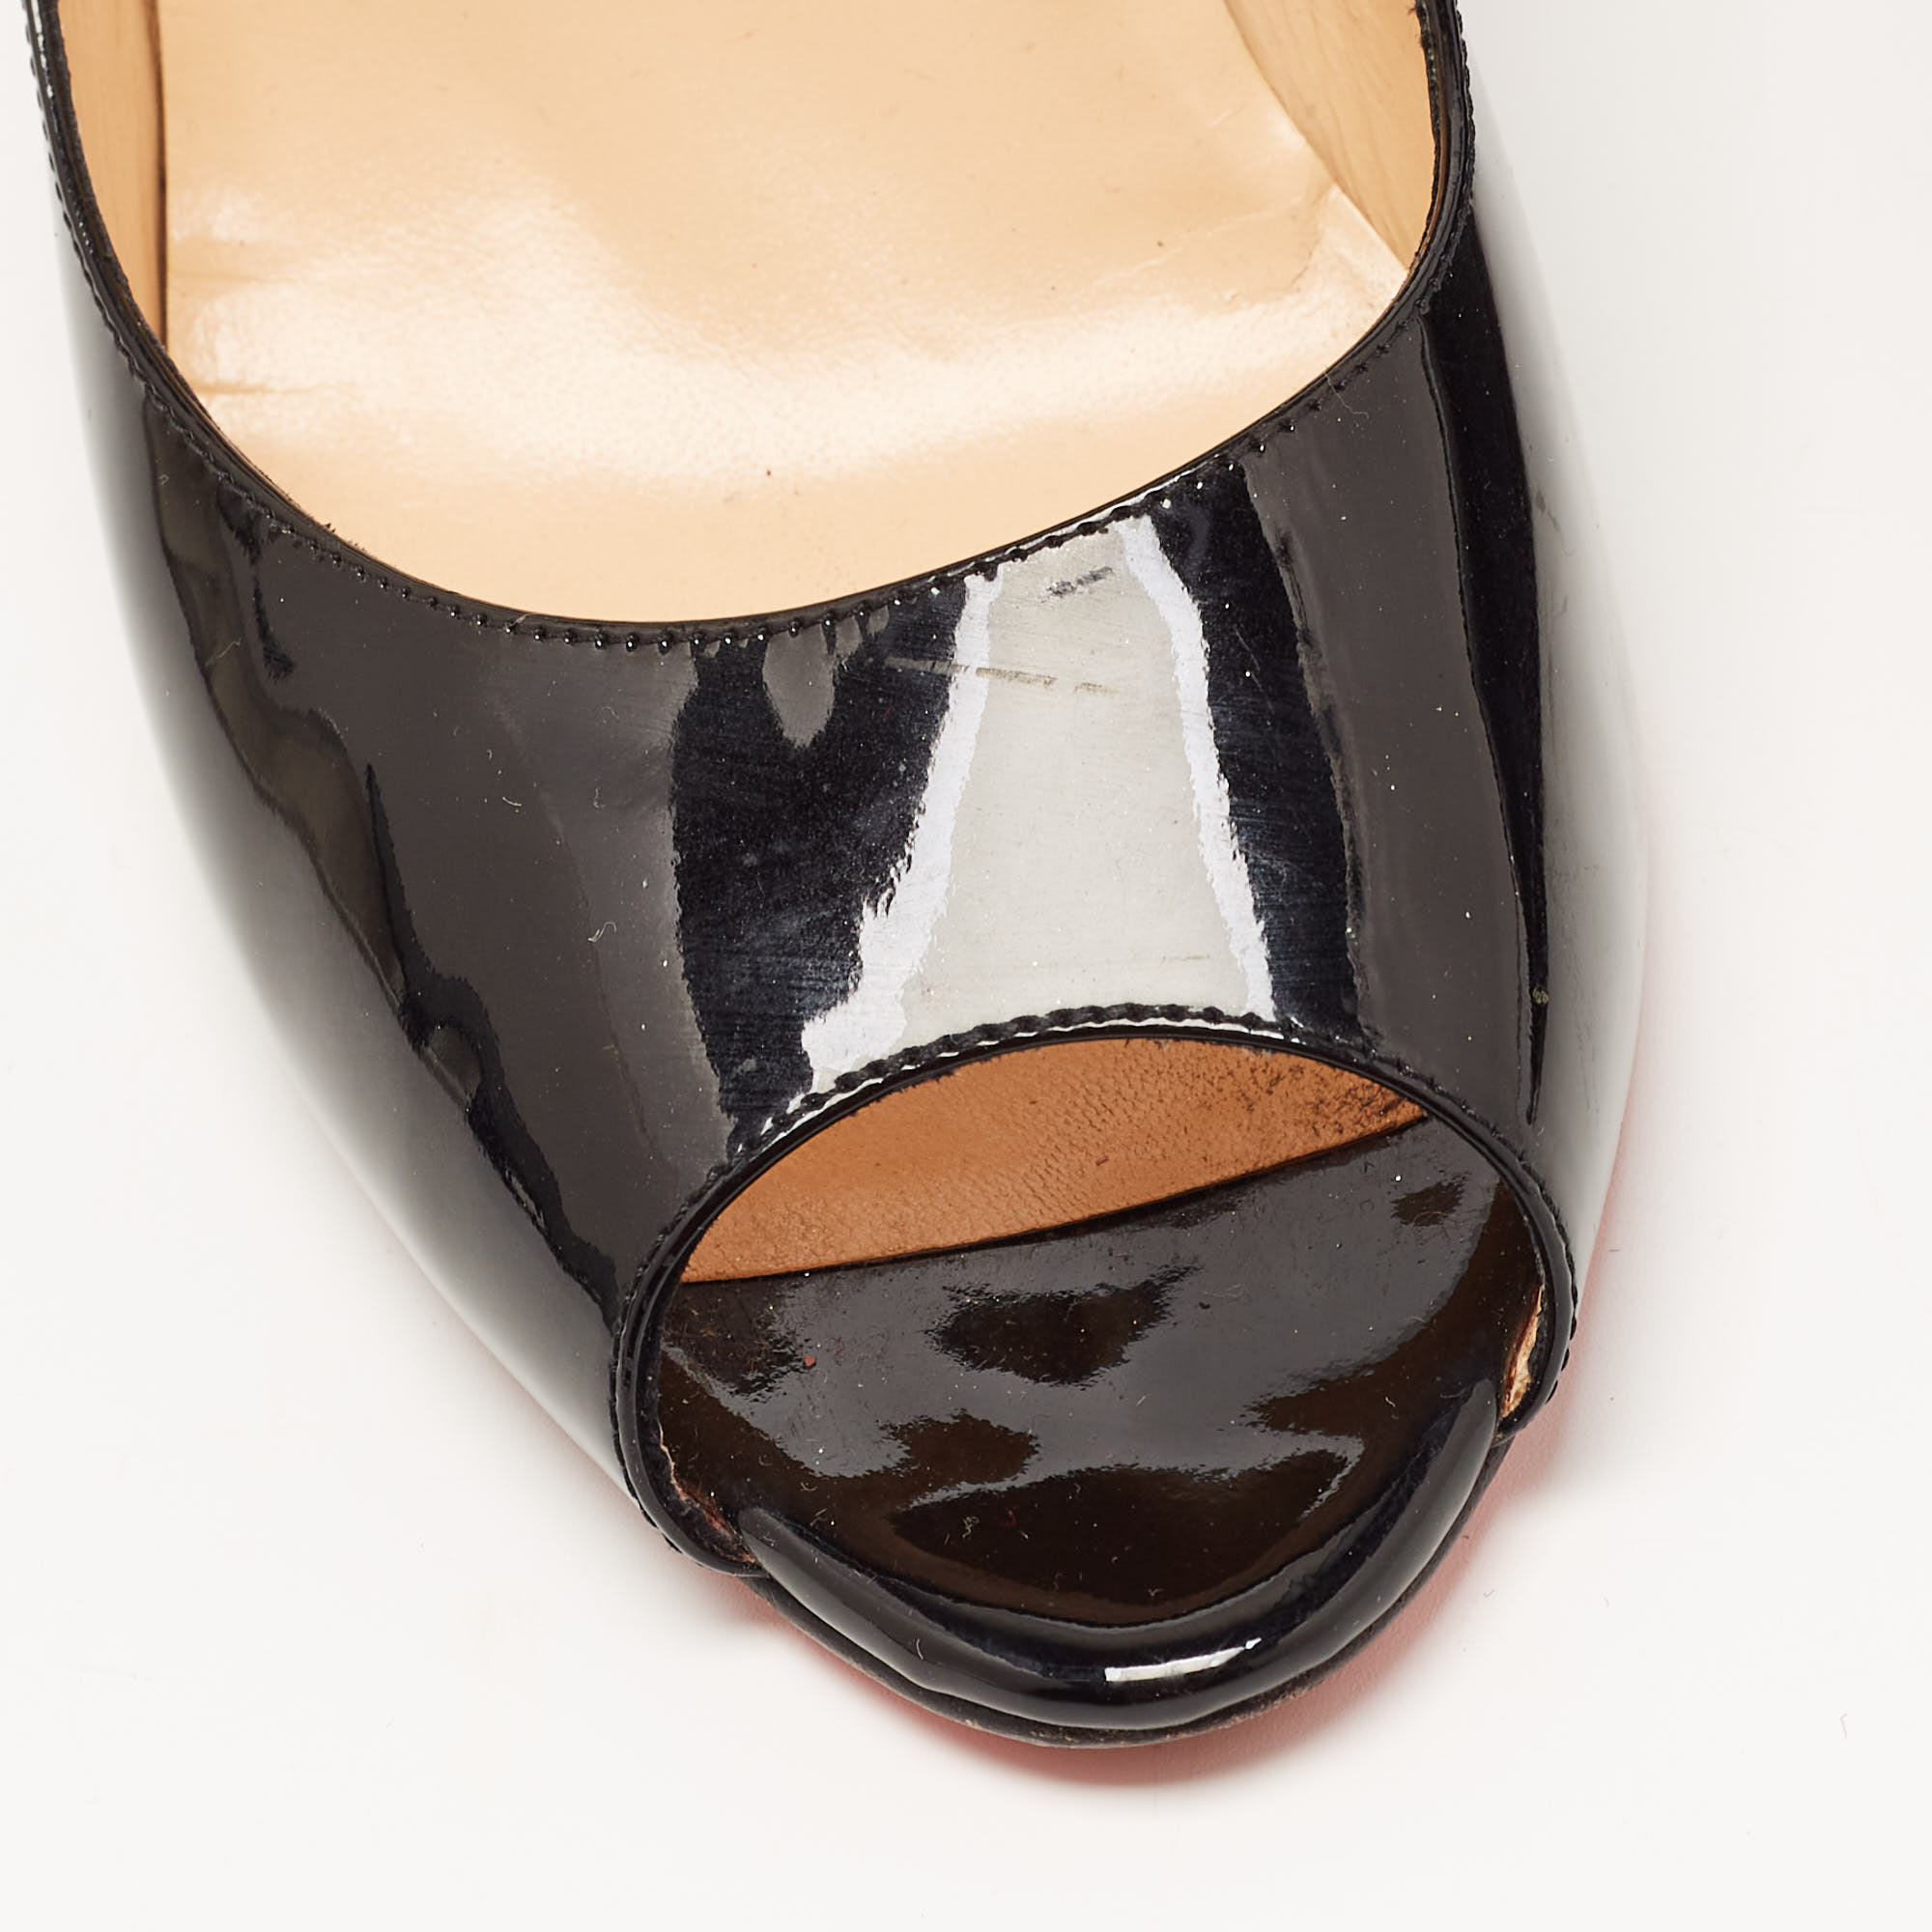 Christian Louboutin Black Patent Leather You You Pumps Size 39.5